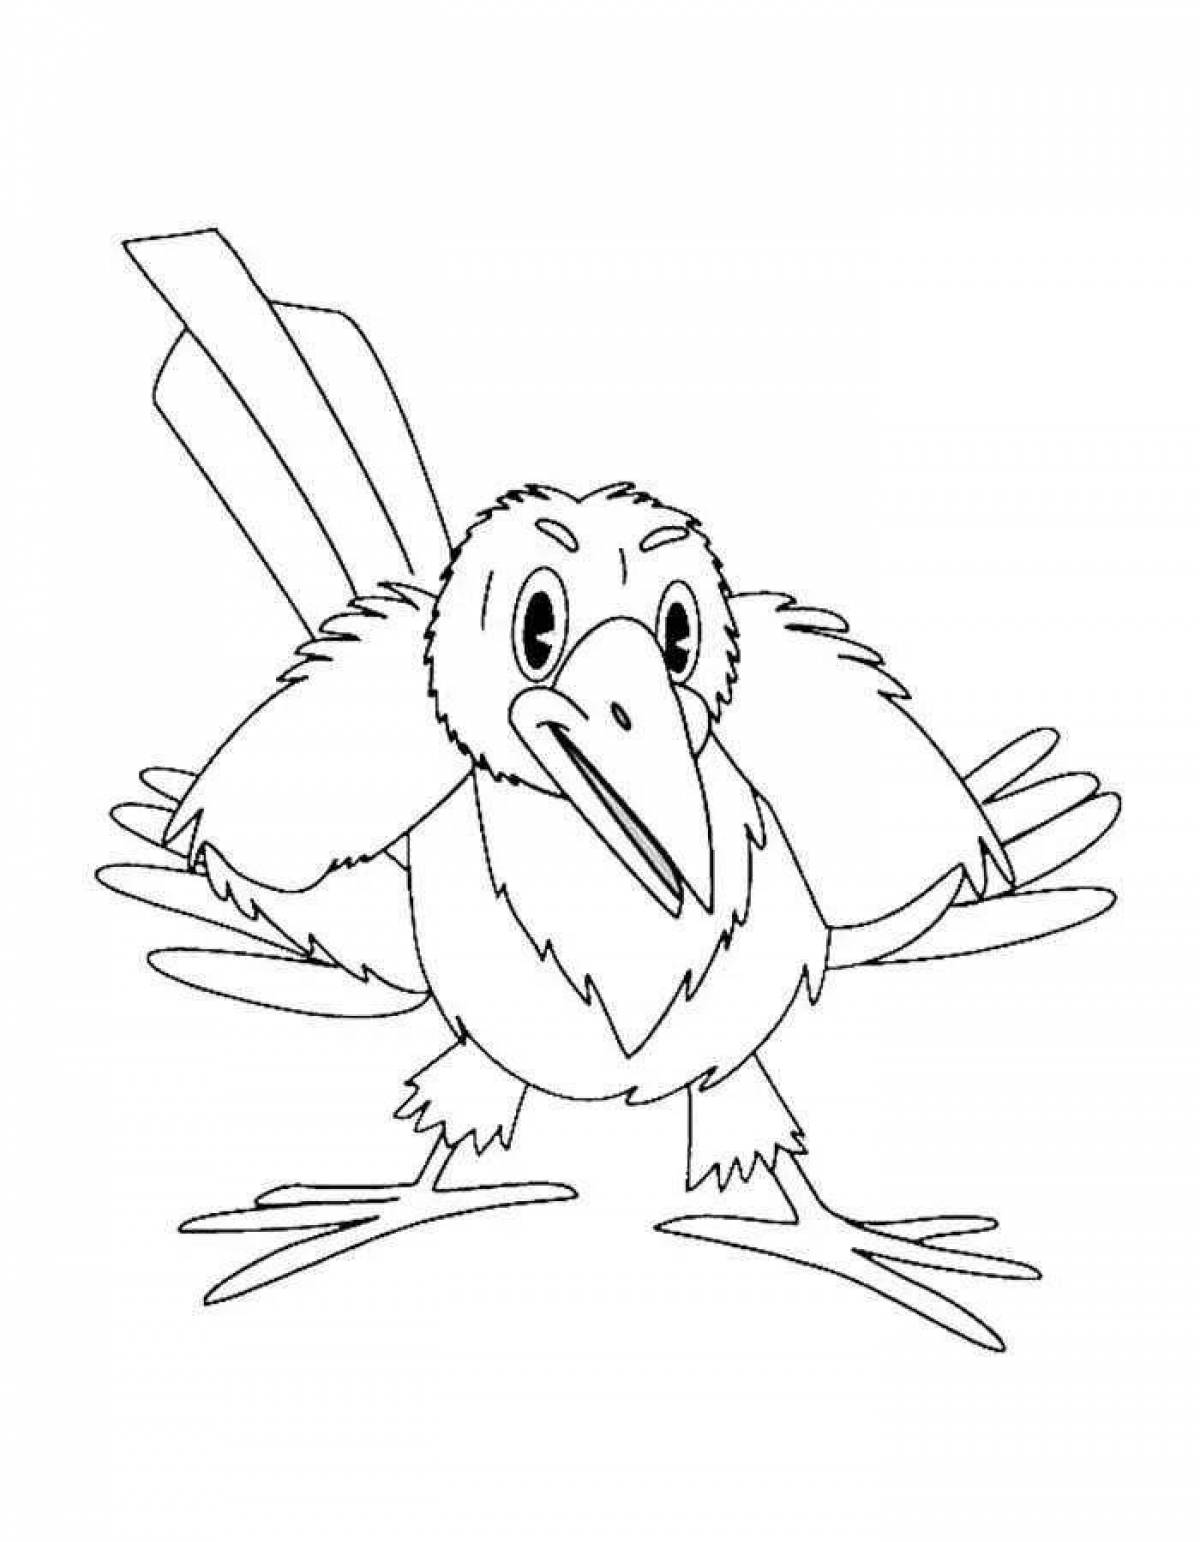 Animated crow coloring page for kids